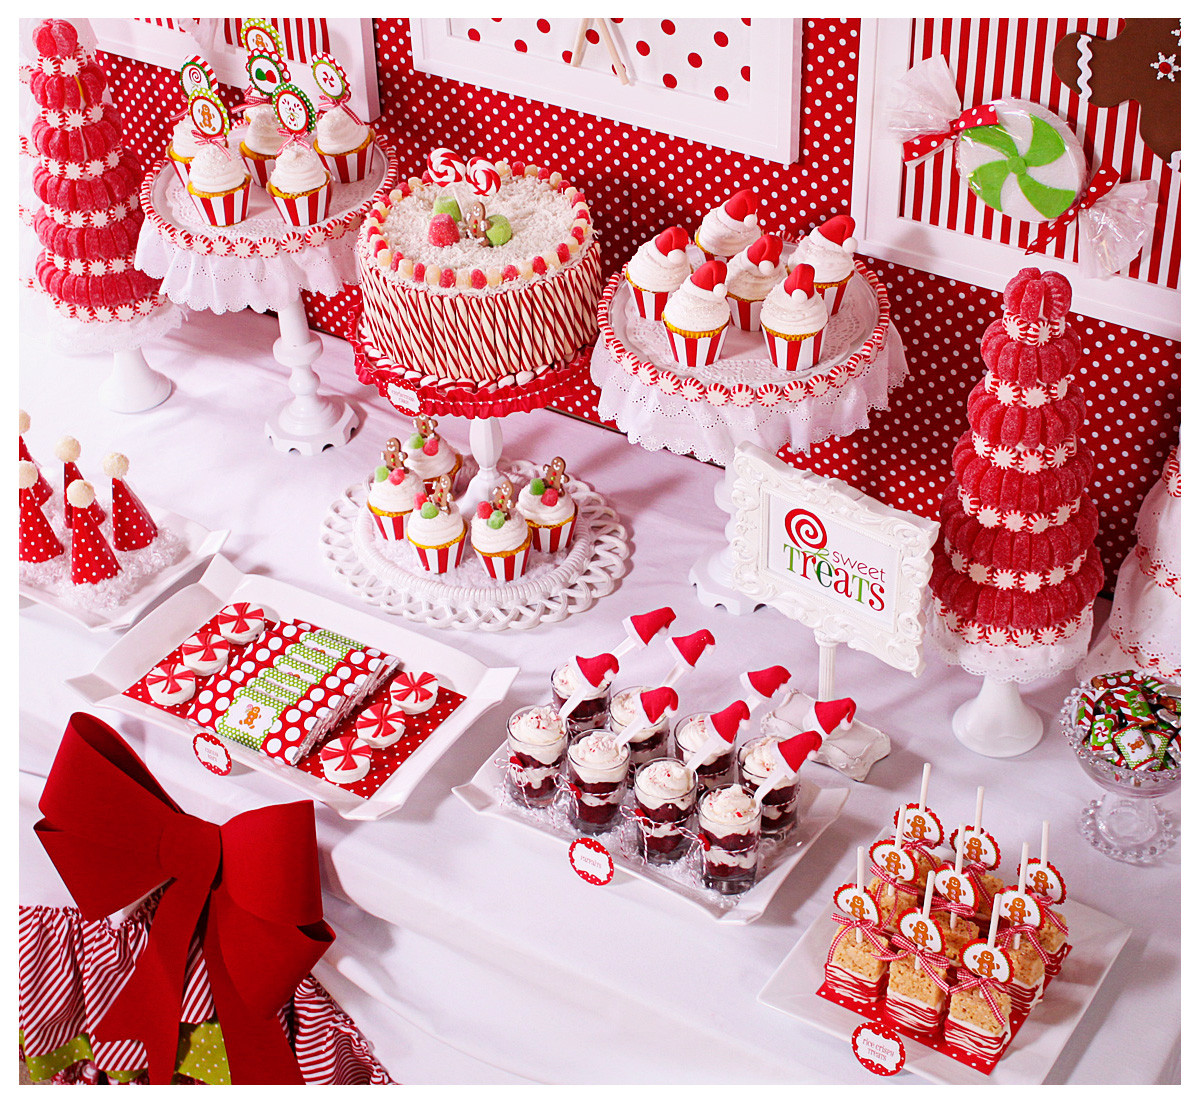 Pinterest Christmas Candy
 Amanda s Parties To Go Candy Christmas Dessert Table